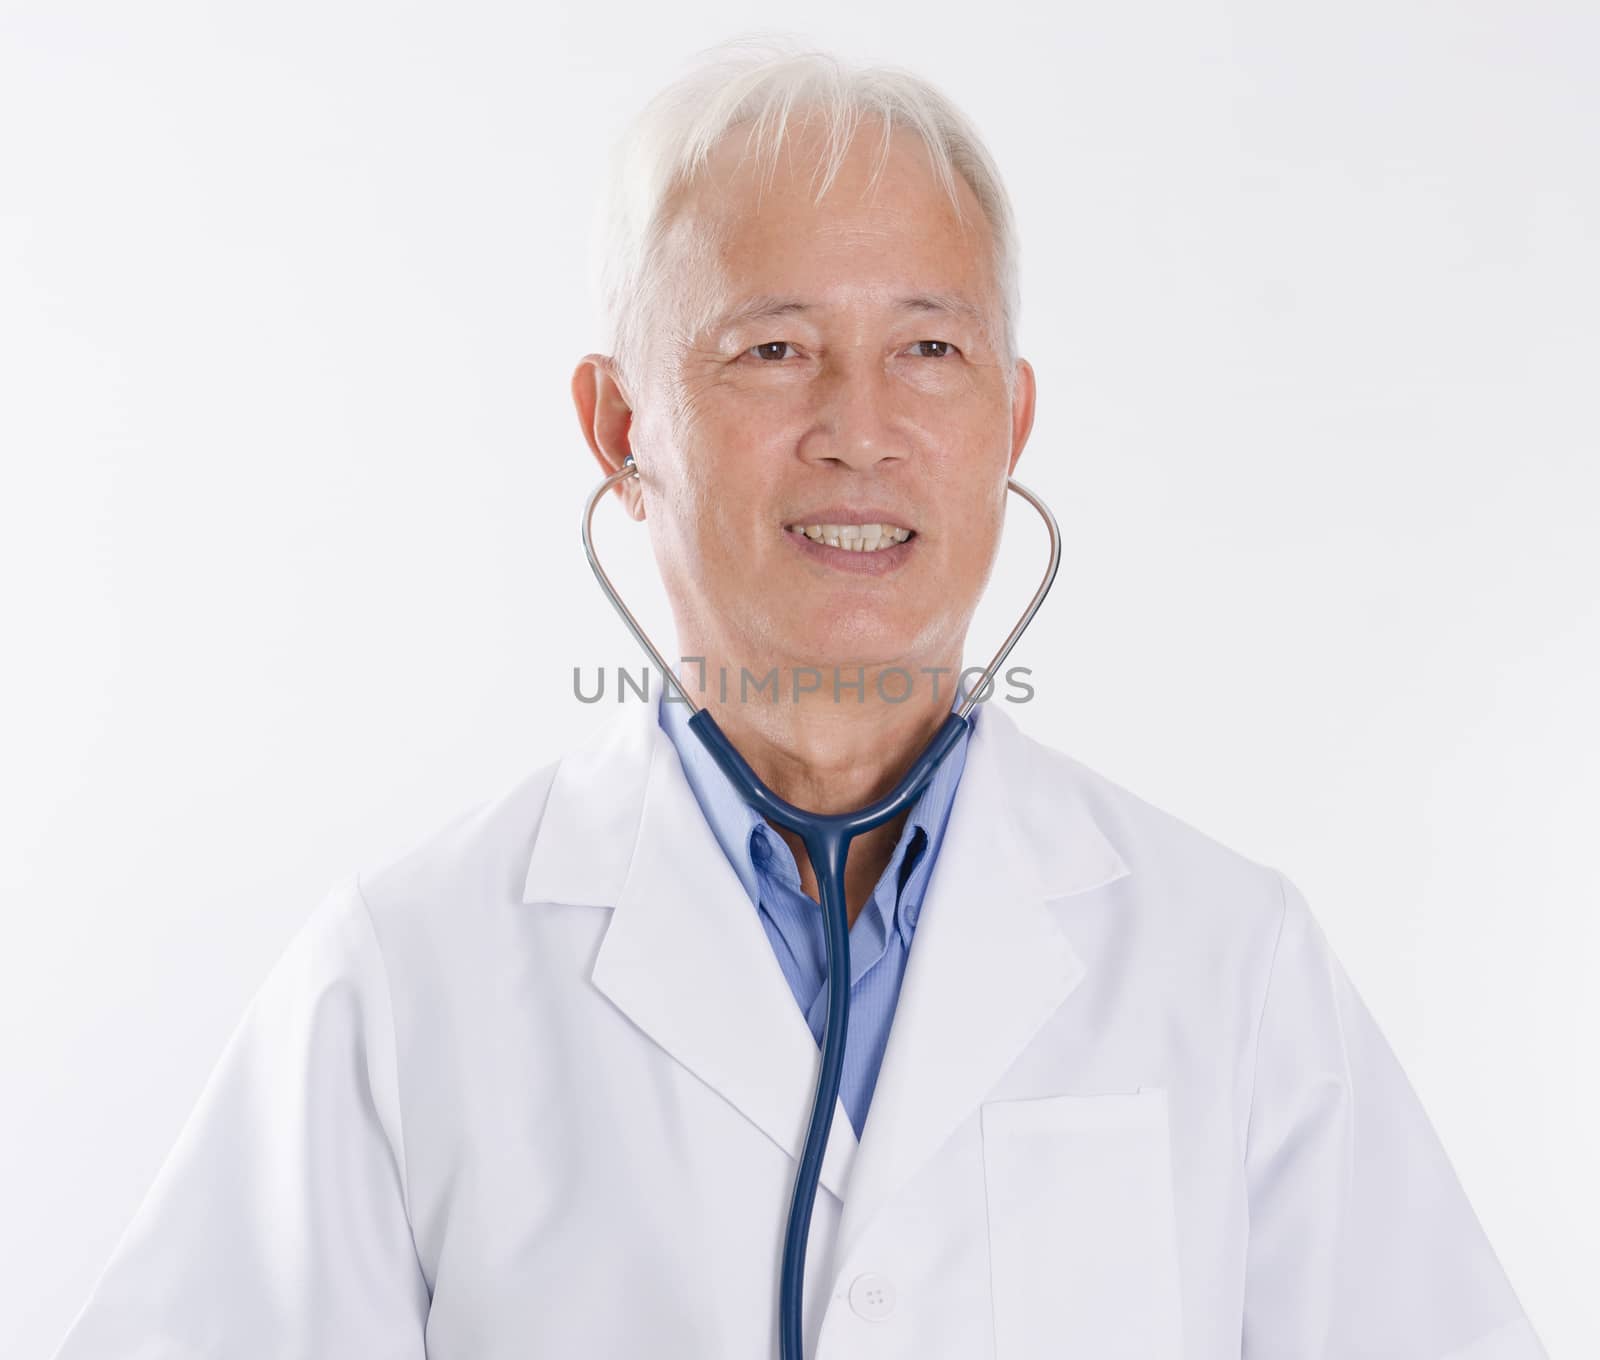 Portrait of Asian medical doctor smiling, standing isolated on white background.